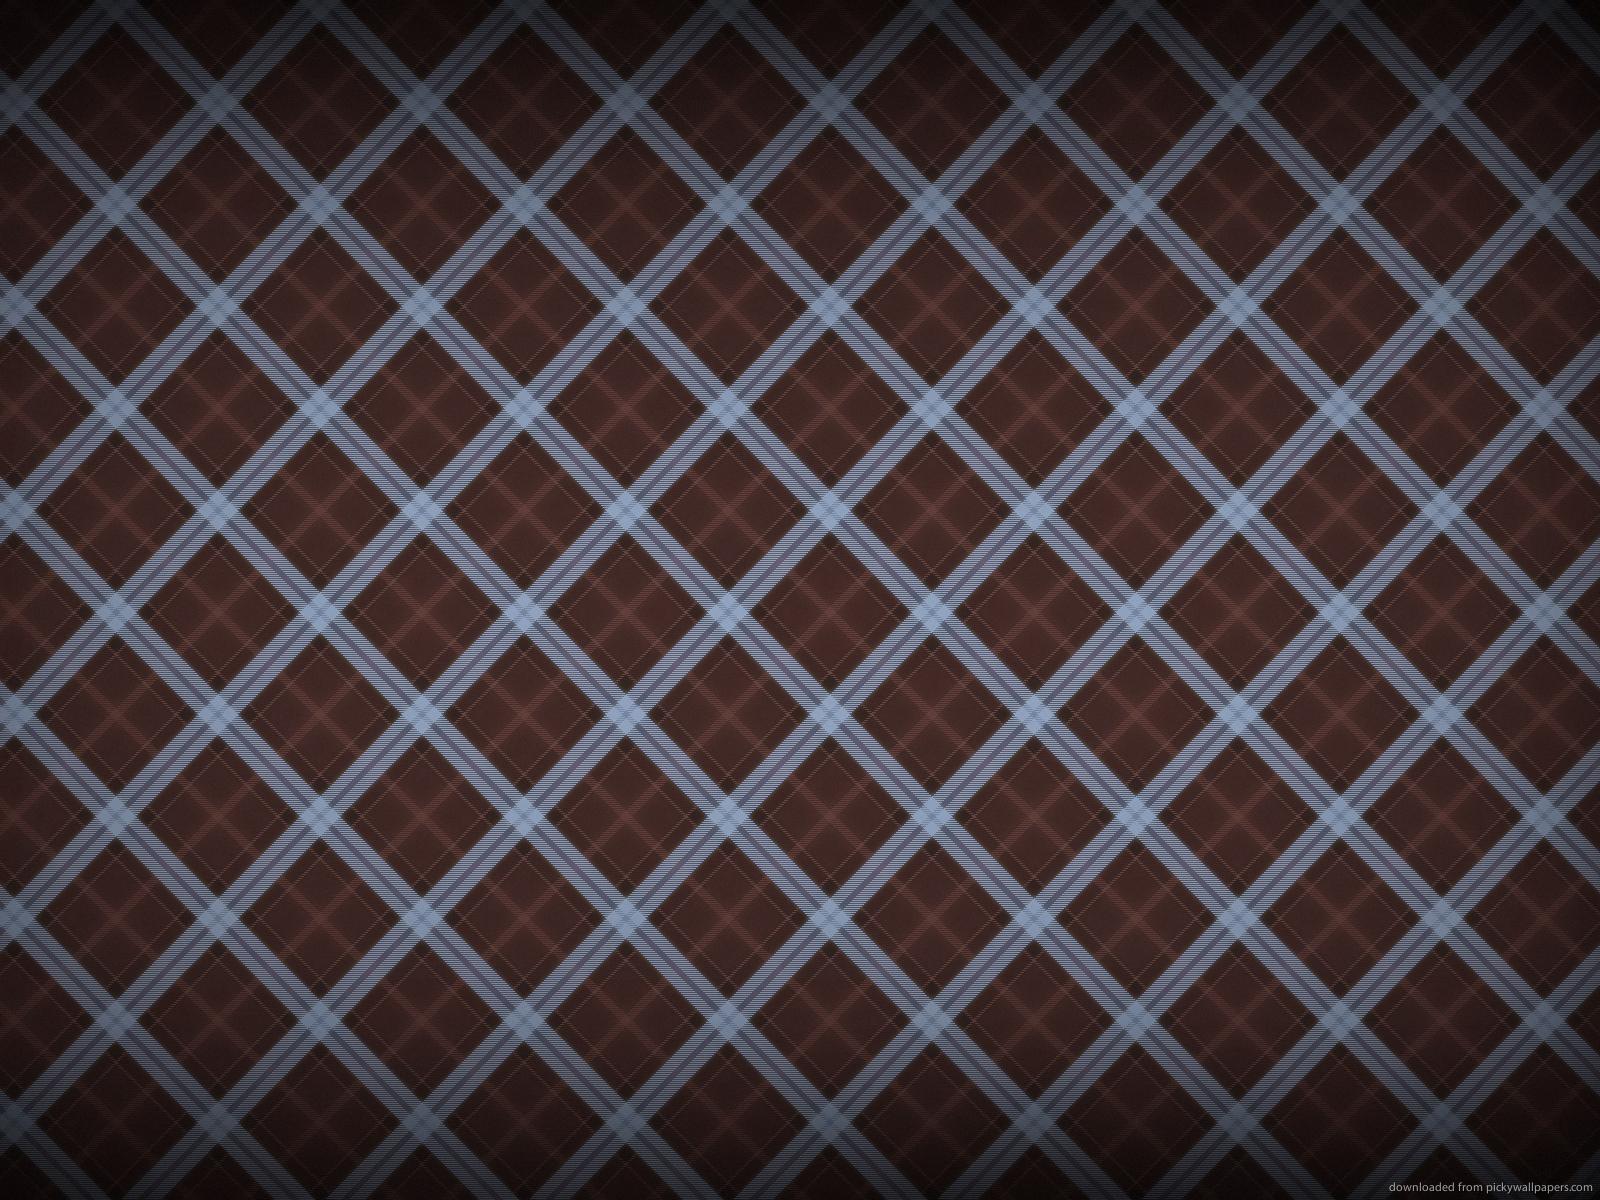 Download 1600x1200 Red blue Checkered Pattern Wallpaper 1600x1200